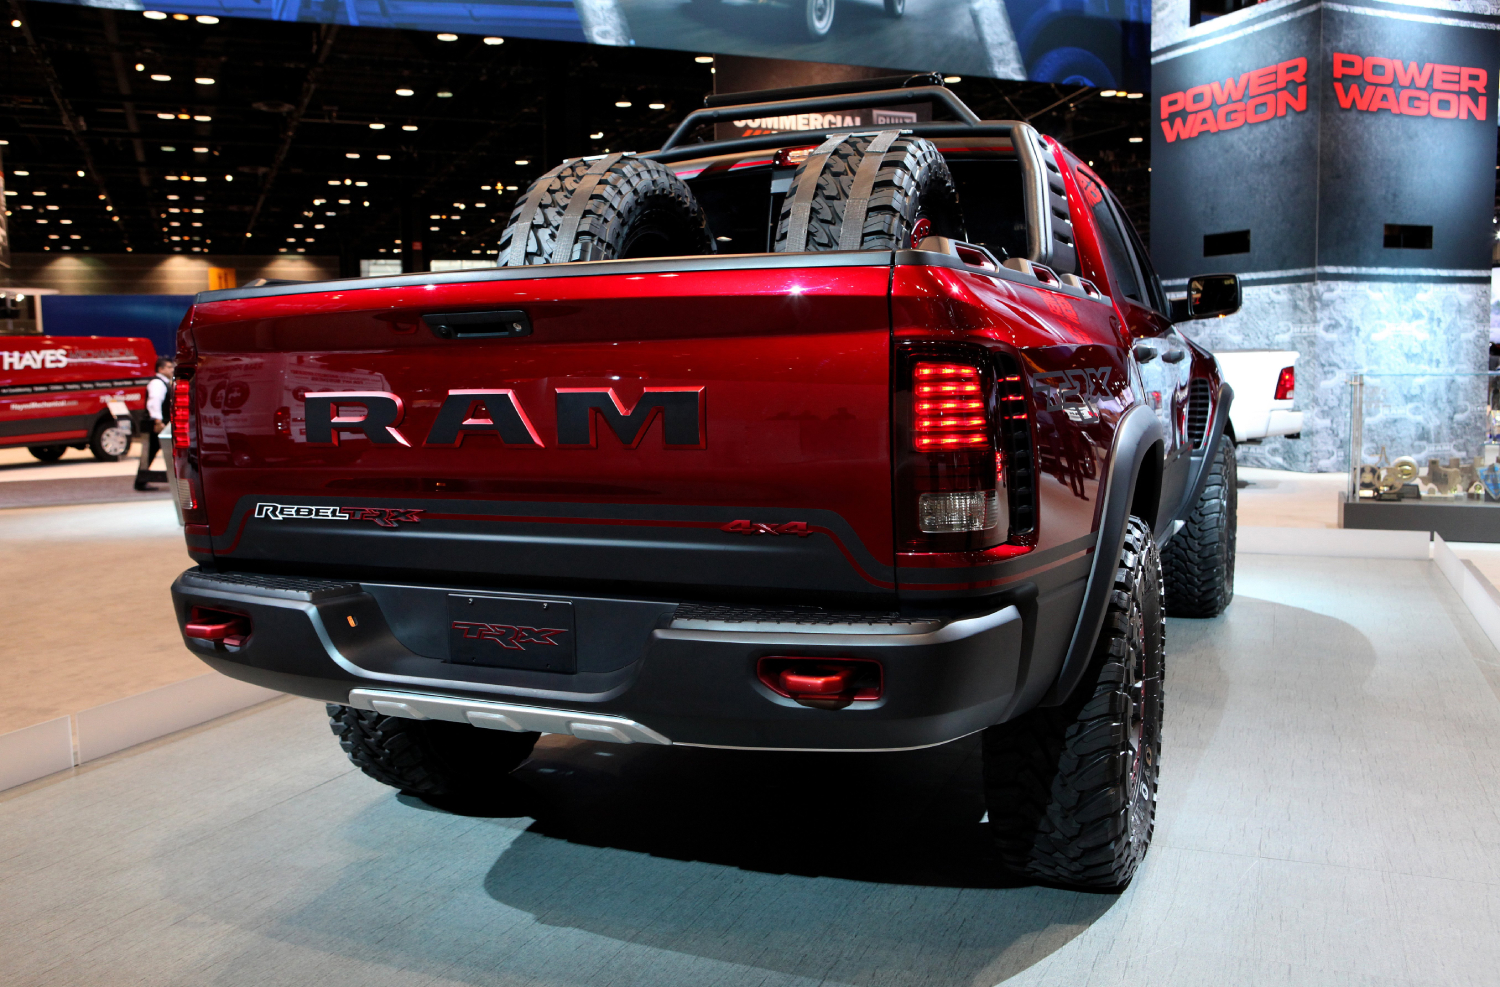 A red 2017 Ram 1500 Rebel TRX 4x4 on display with tires in the trunk